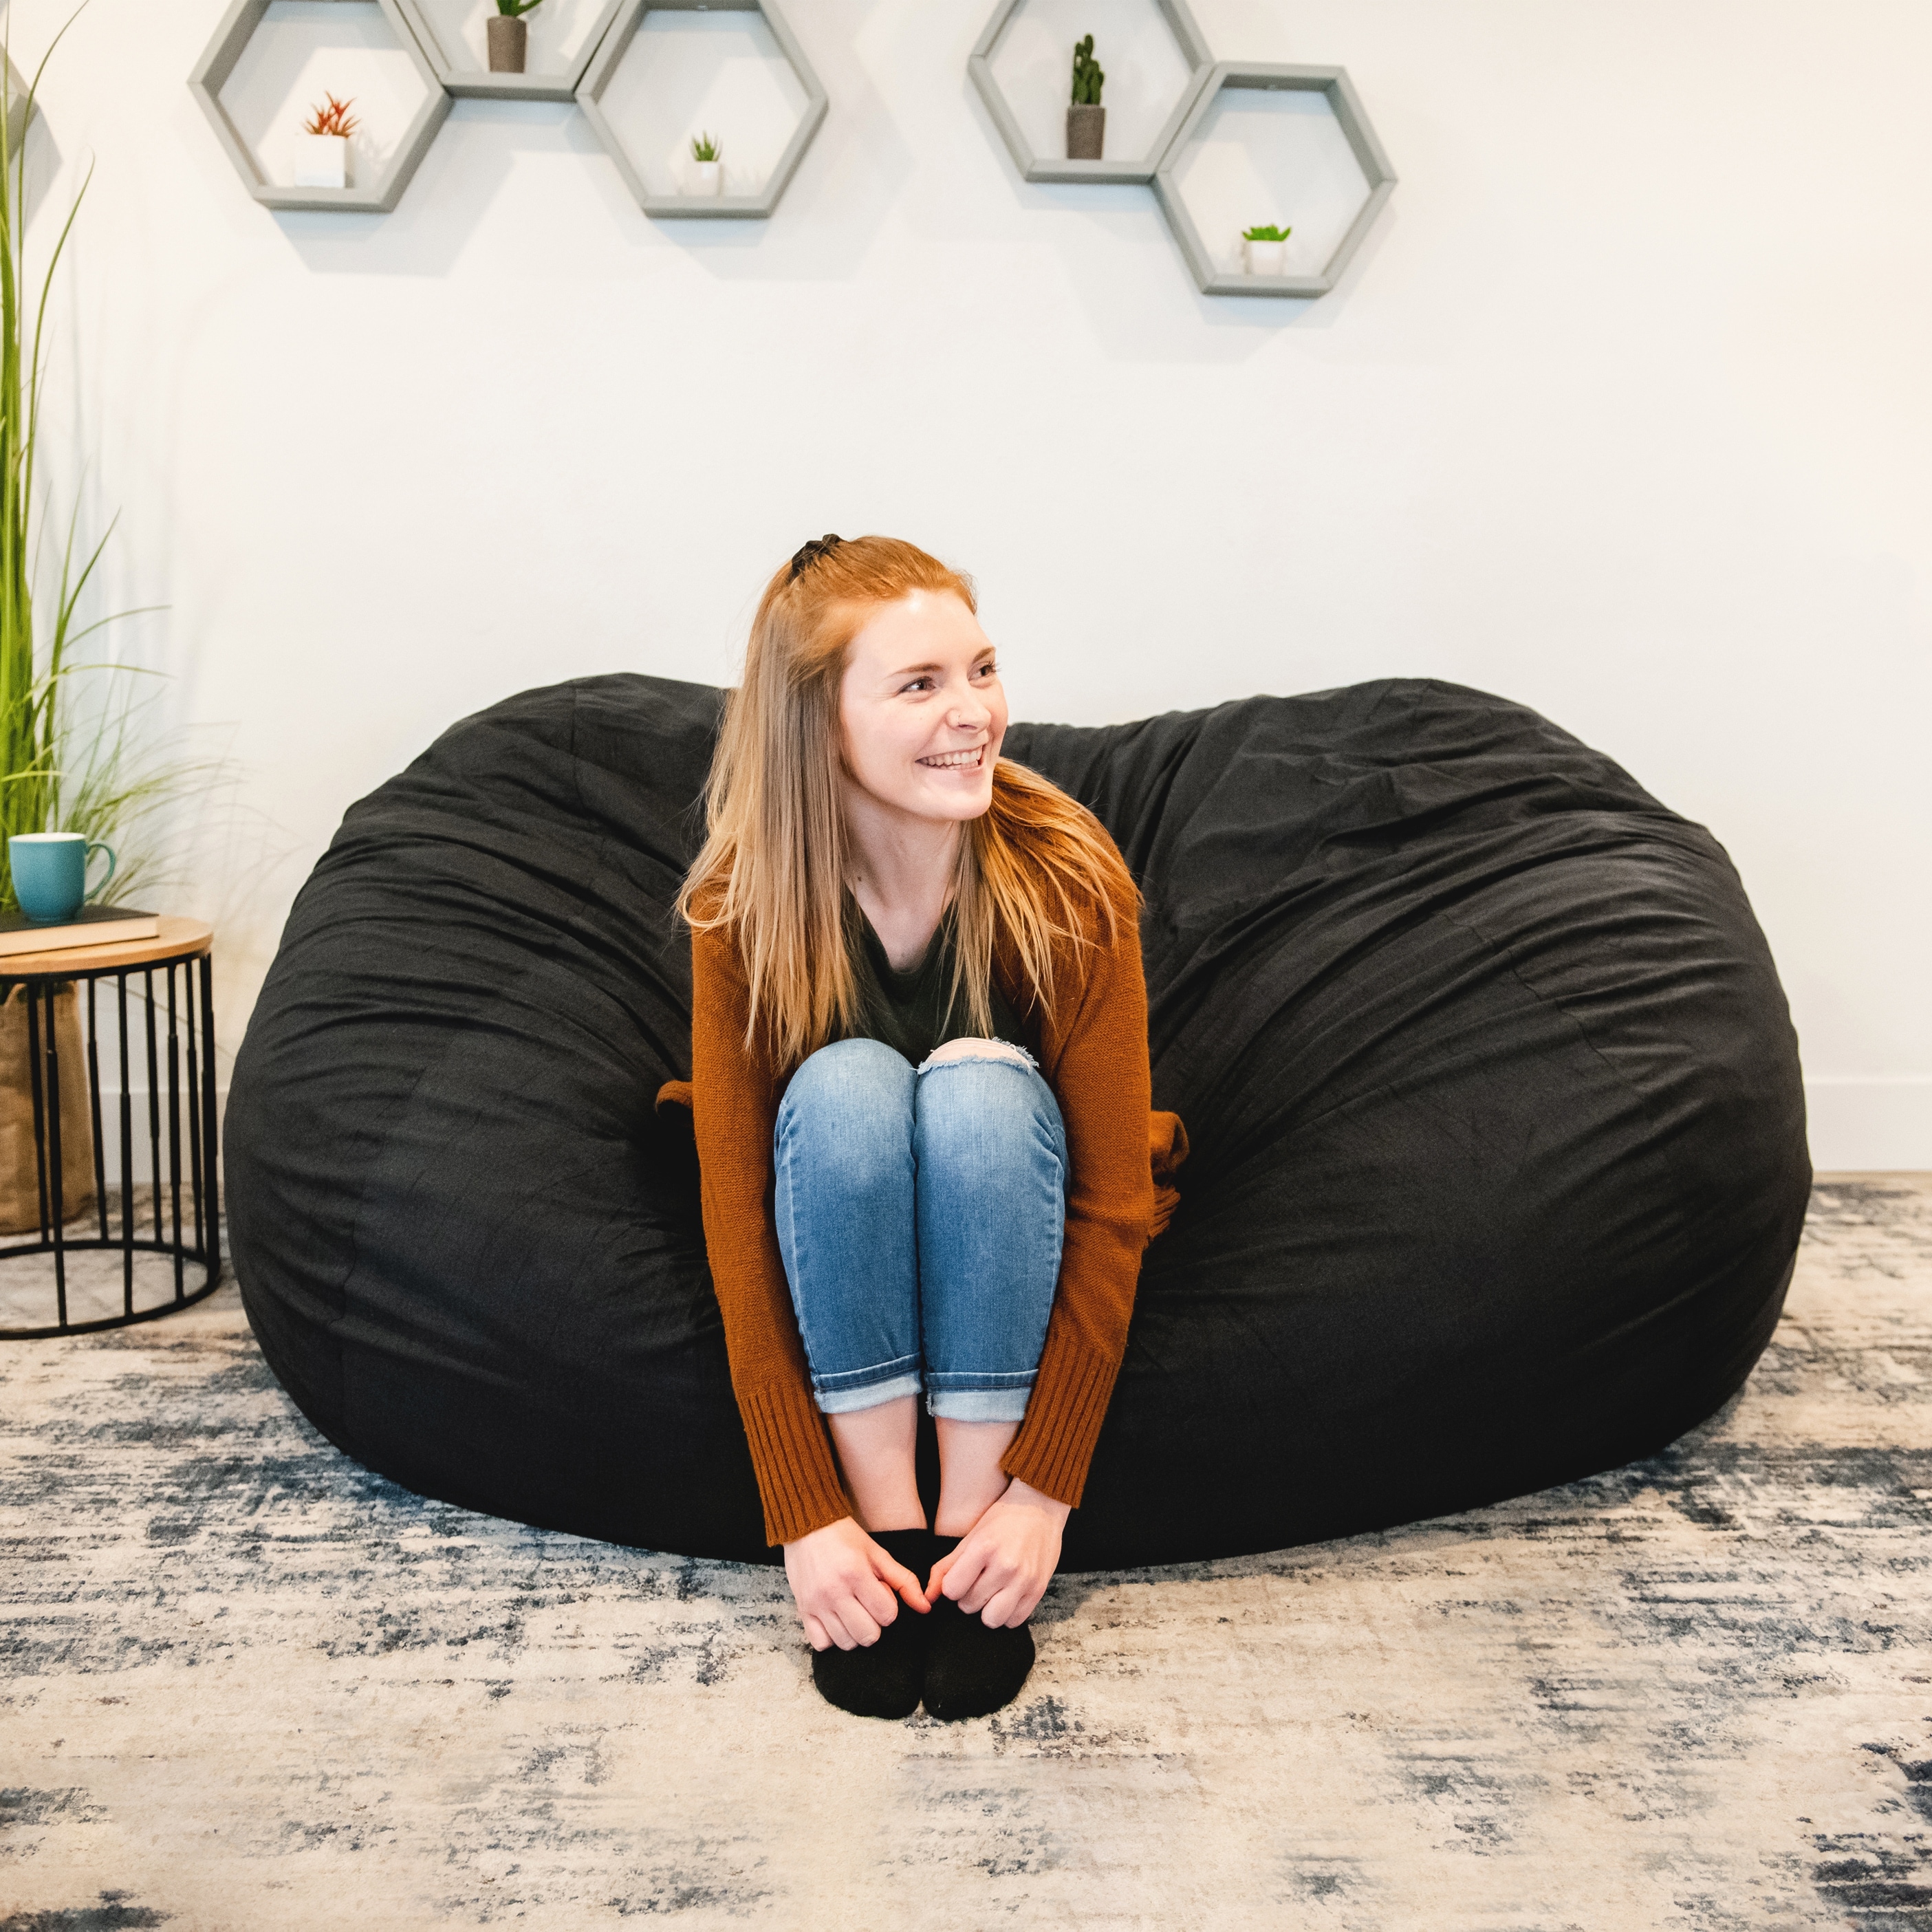 https://ak1.ostkcdn.com/images/products/is/images/direct/09ee5166c3a50e0db70d8119ebb809c0c36da726/Big-Joe-XXL-Fuf-Bean-Bag-Chair-%28Removable-Cover%29.jpg